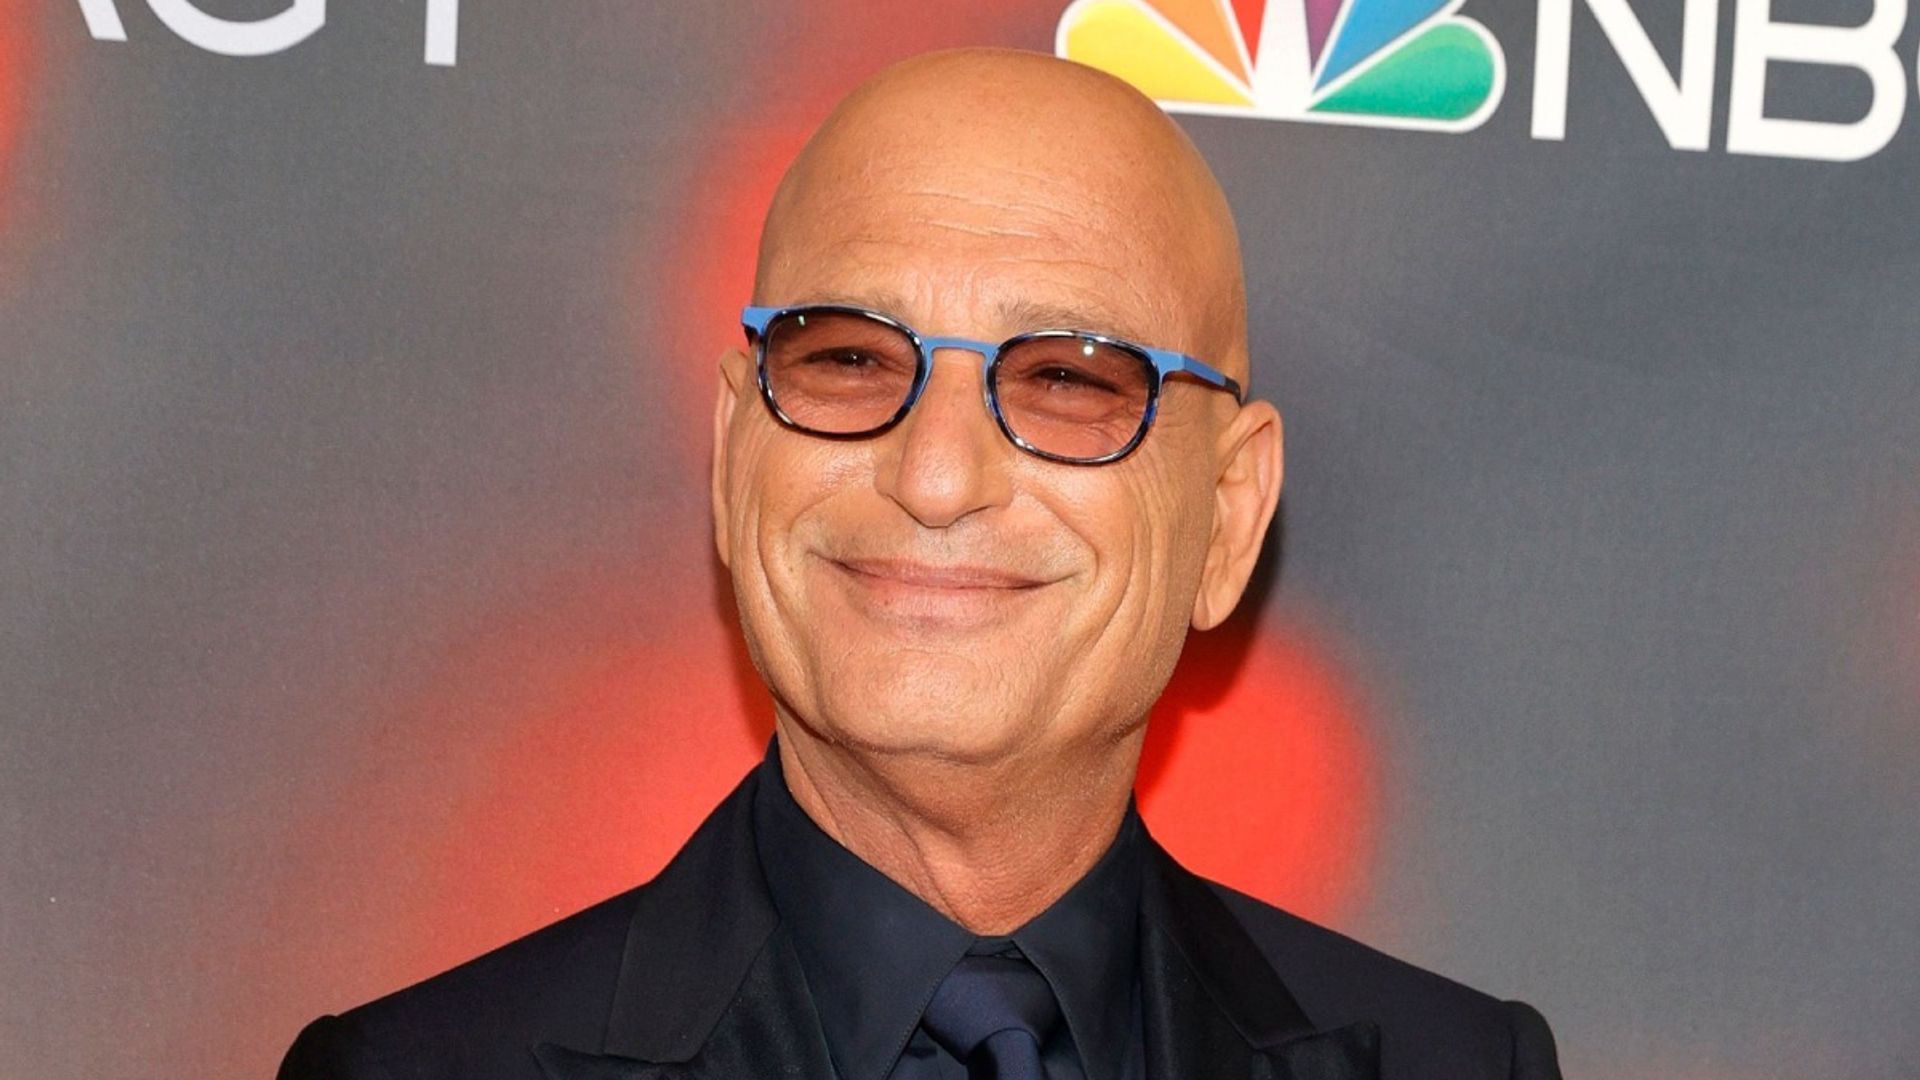 America's Got Talent judge Howie Mandel rushed to hospital after terrifying health scare